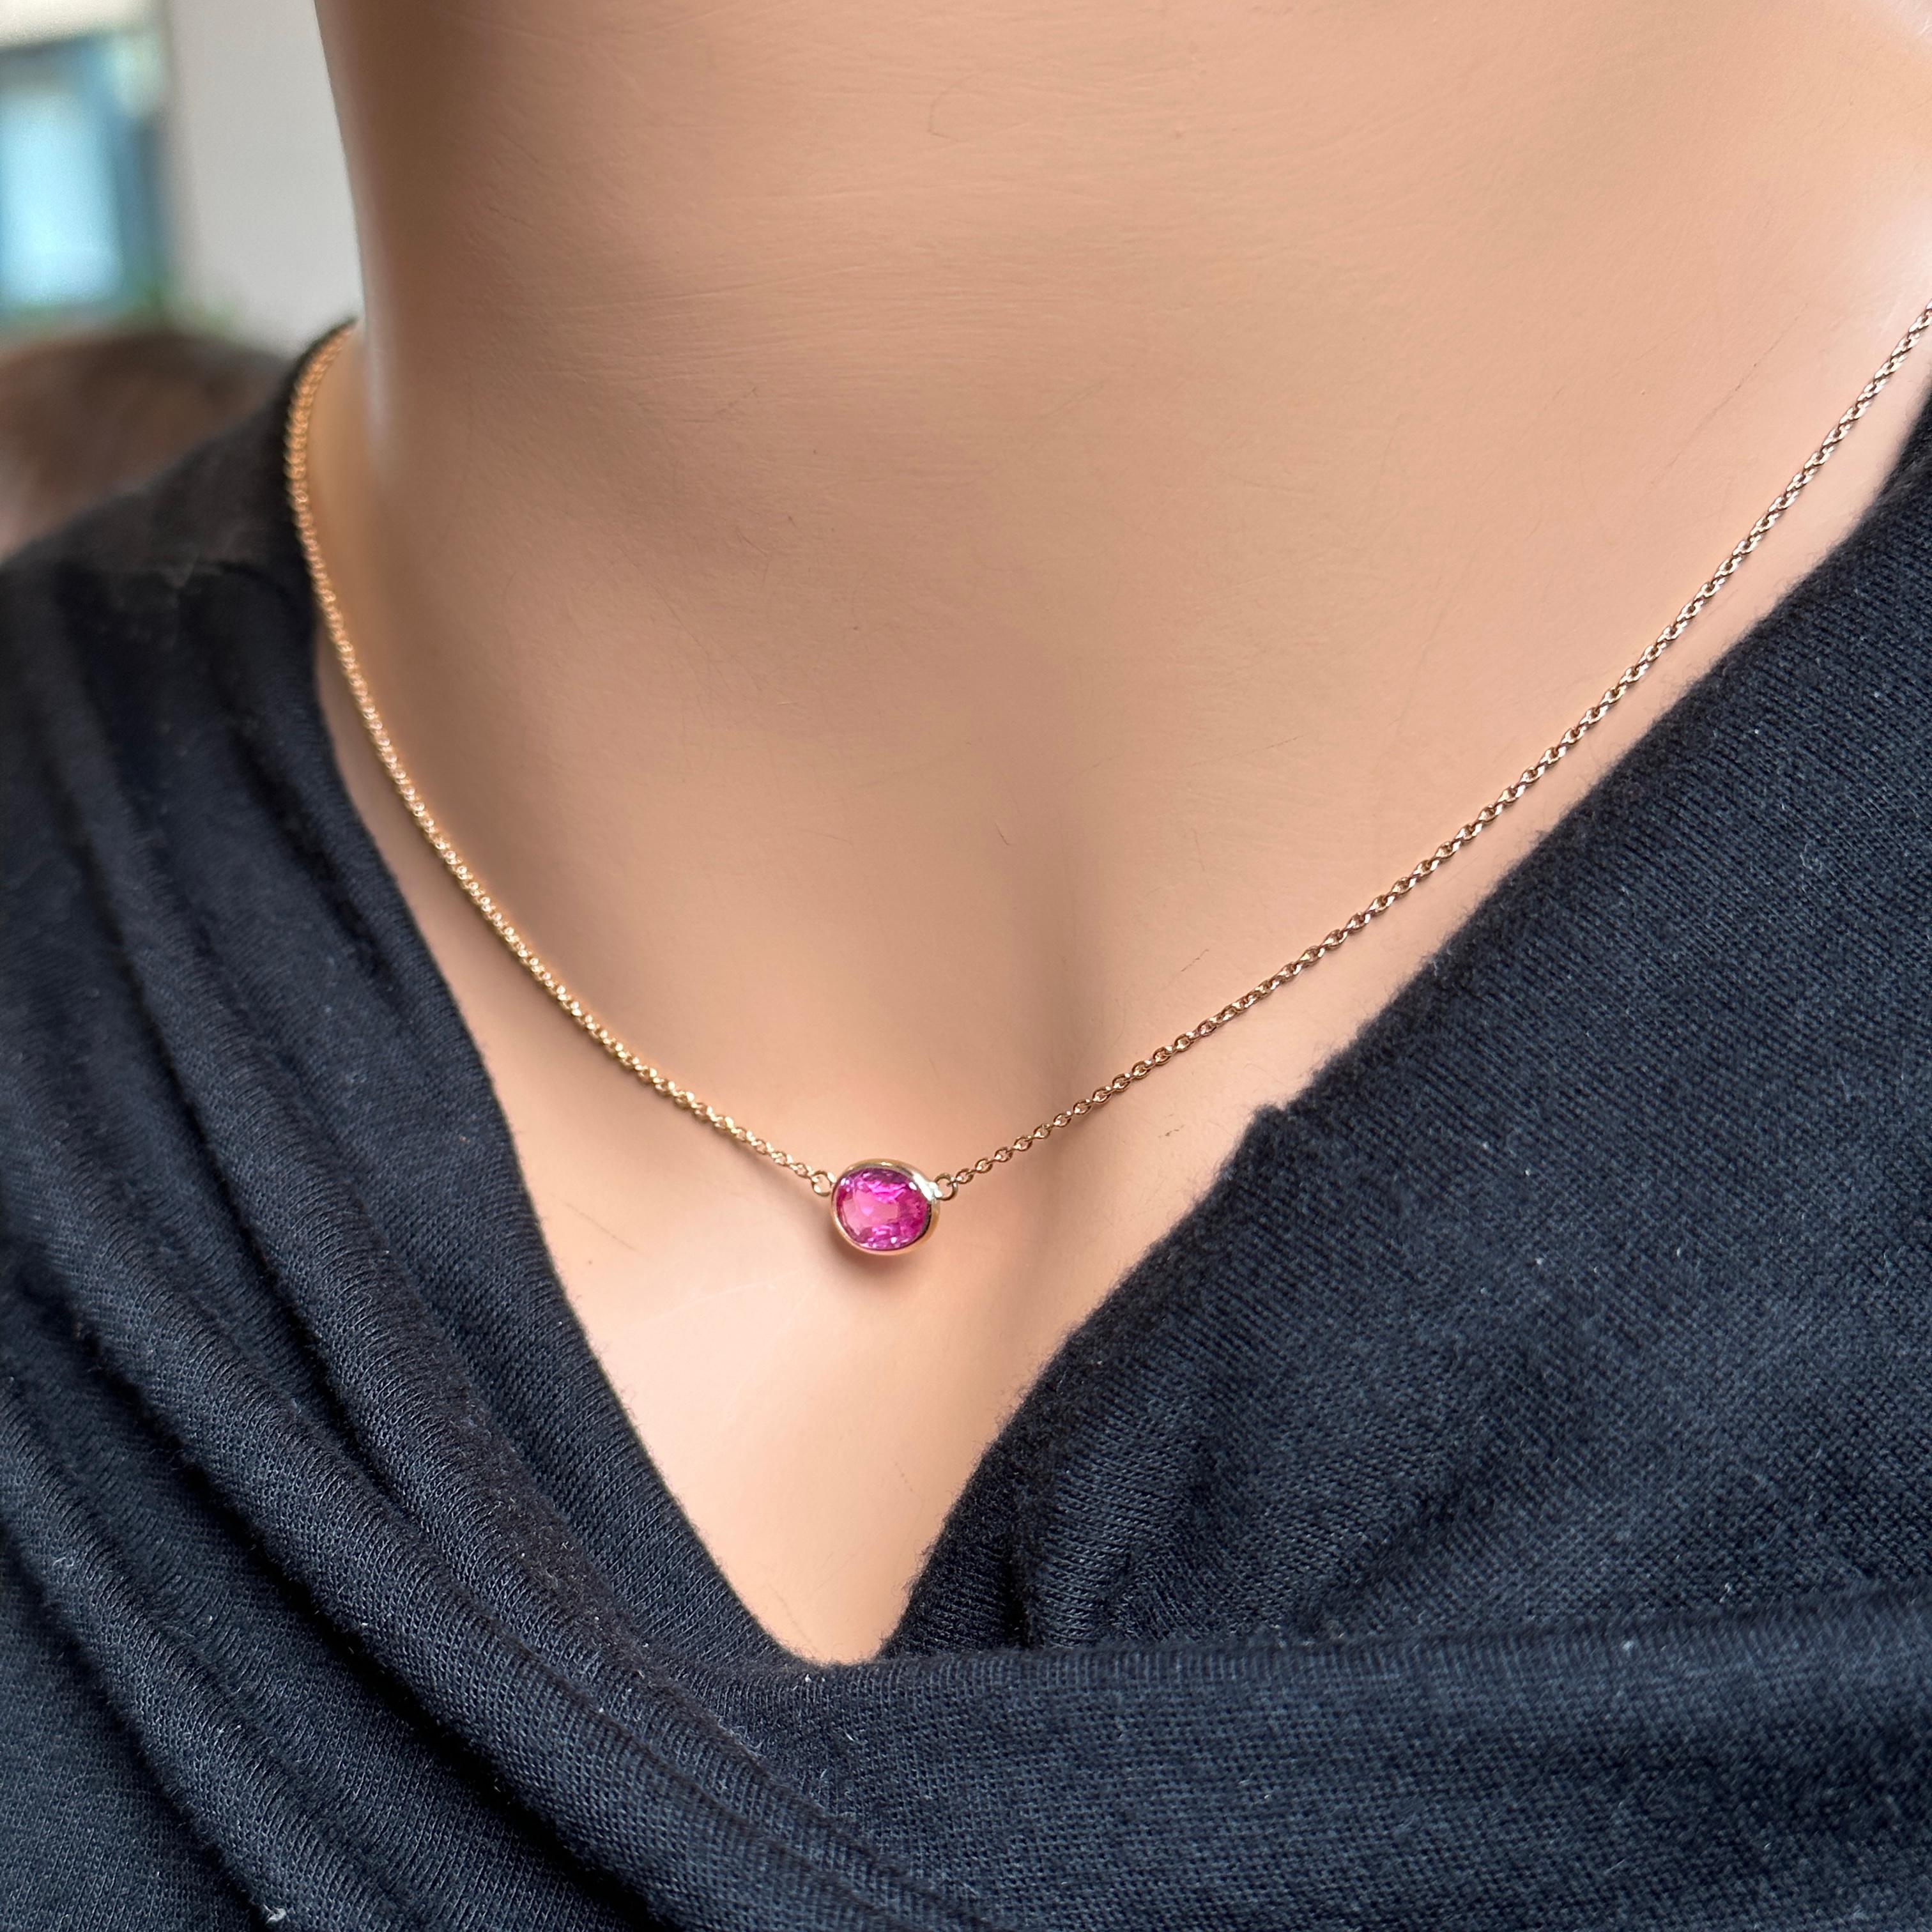 Oval Cut 1.43 Carat Pink Sapphire Oval & Fashion Necklaces In 14K Rose Gold For Sale